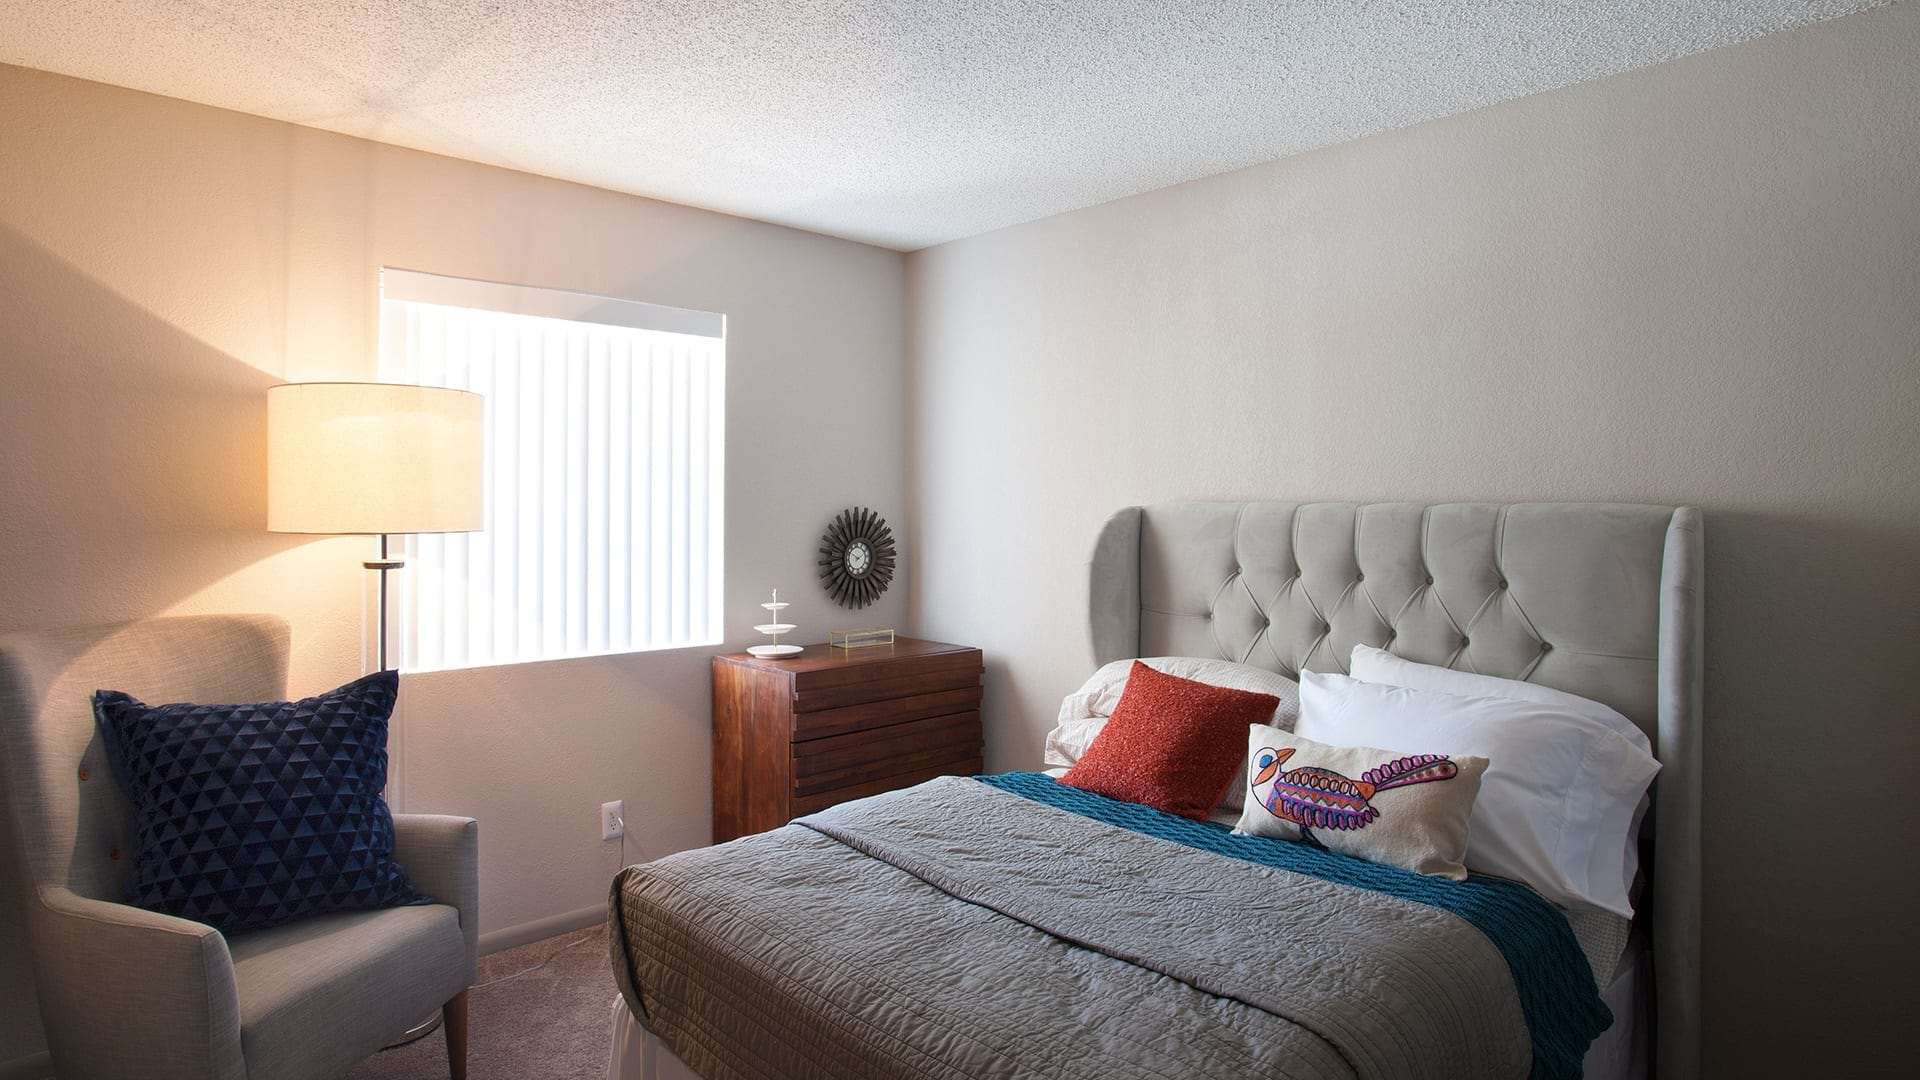 Bedroom with Natural Lighting at Our Apartments Near Gilbert, AZ